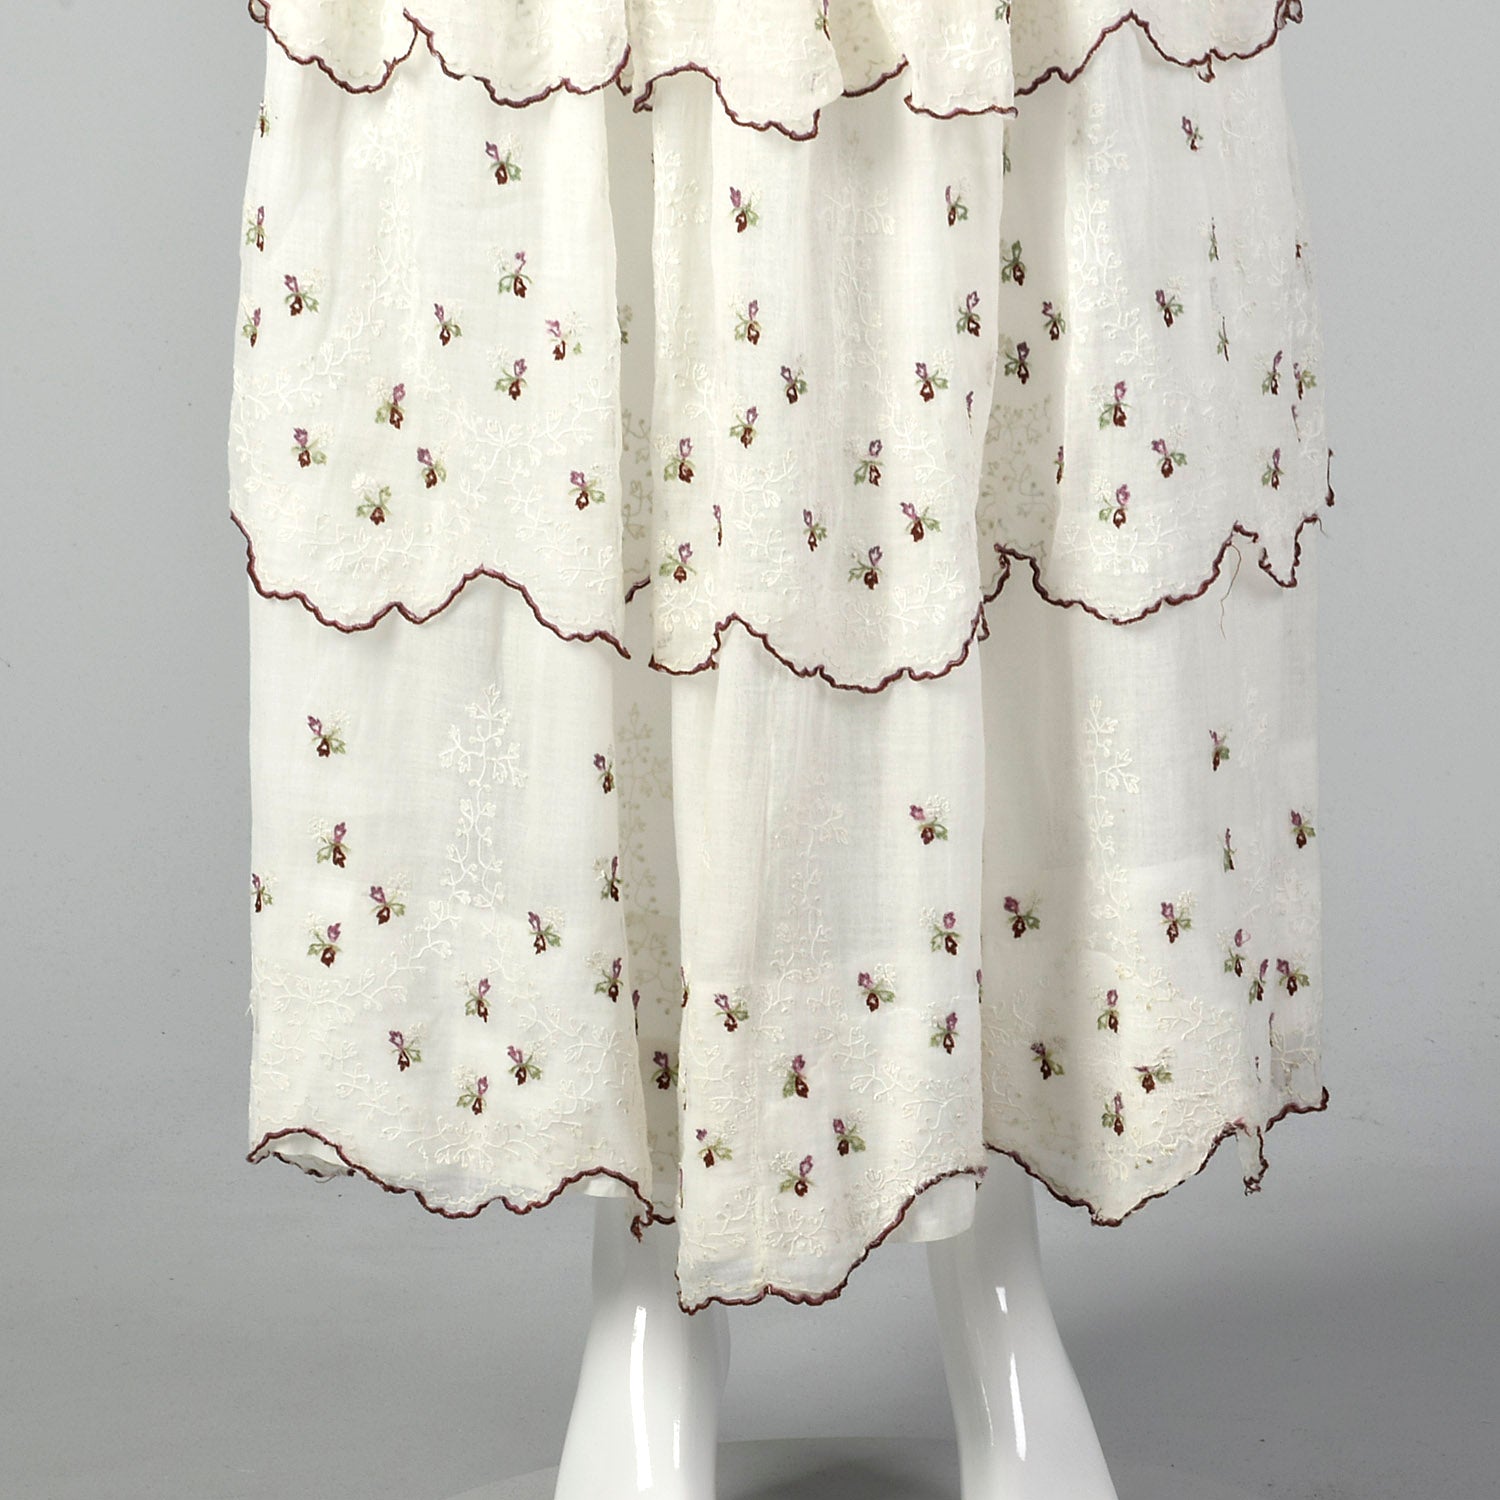 Large 1860s Tiered Embroidered Skirt